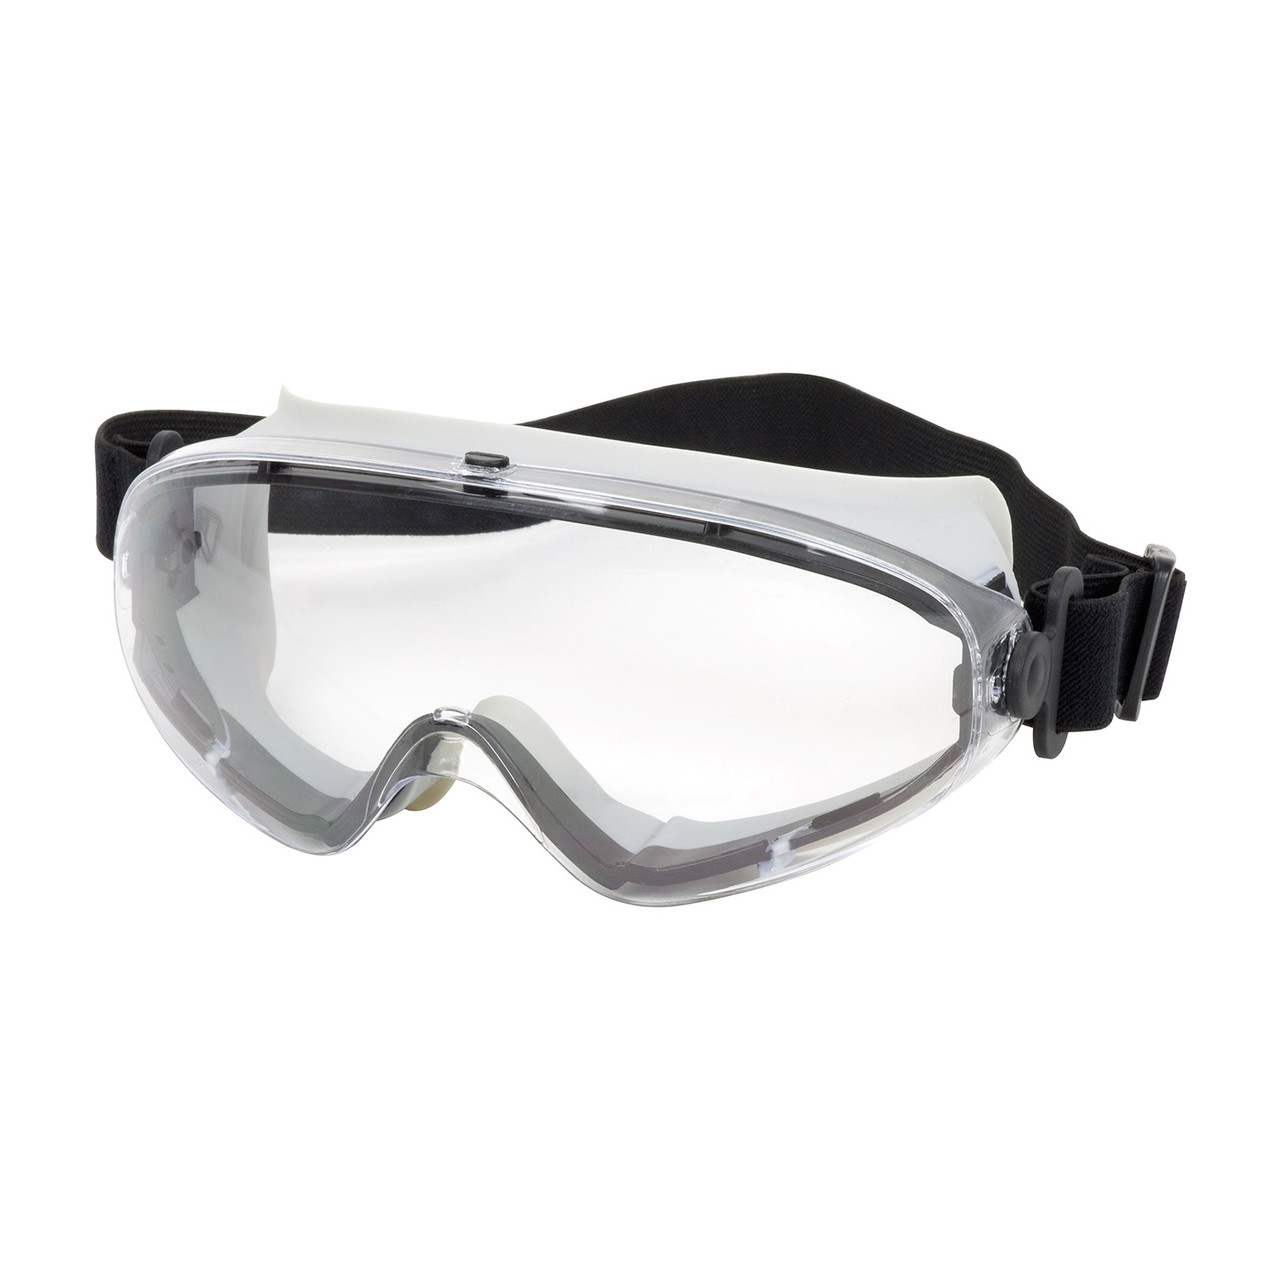 PIP 251-80-0020 II Indirect Vent Goggle with Light Gray Clear Lens and Anti-Scratch / Anti-Fog - Non-Latex Strap - The Safety LLC